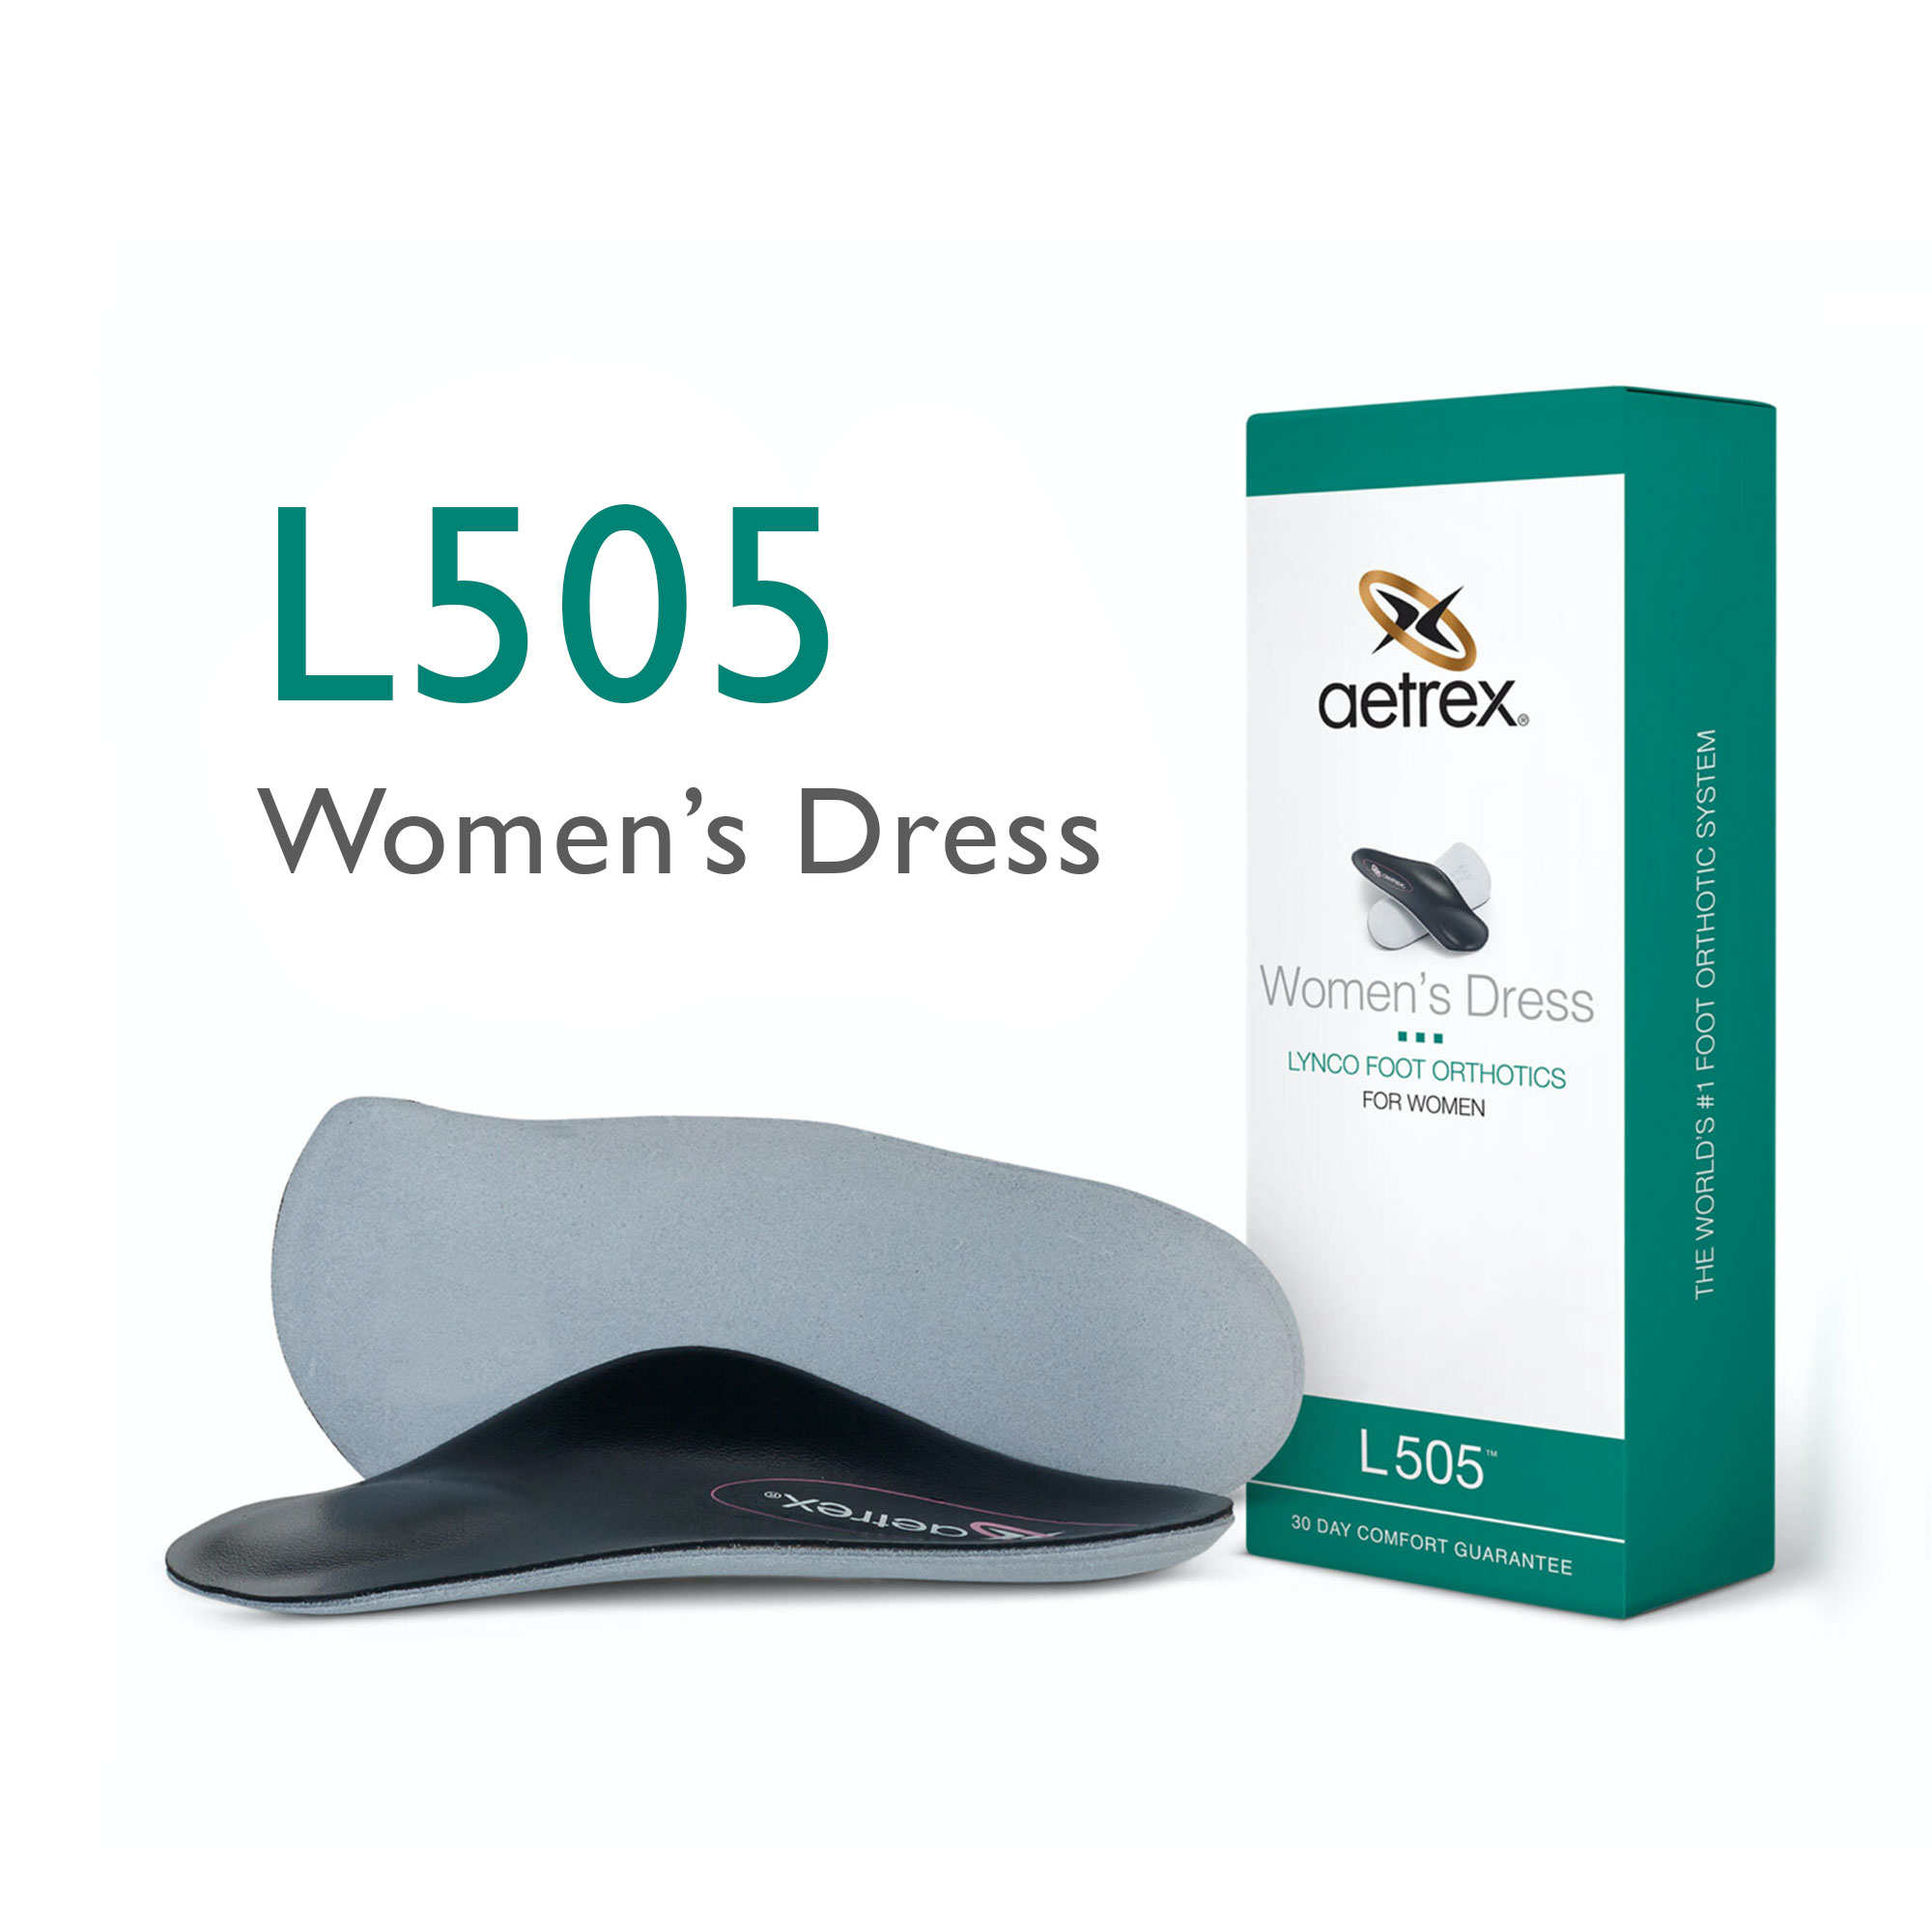 Women's Dress Med/High Arch W/ Metatarsal Support Orthotic